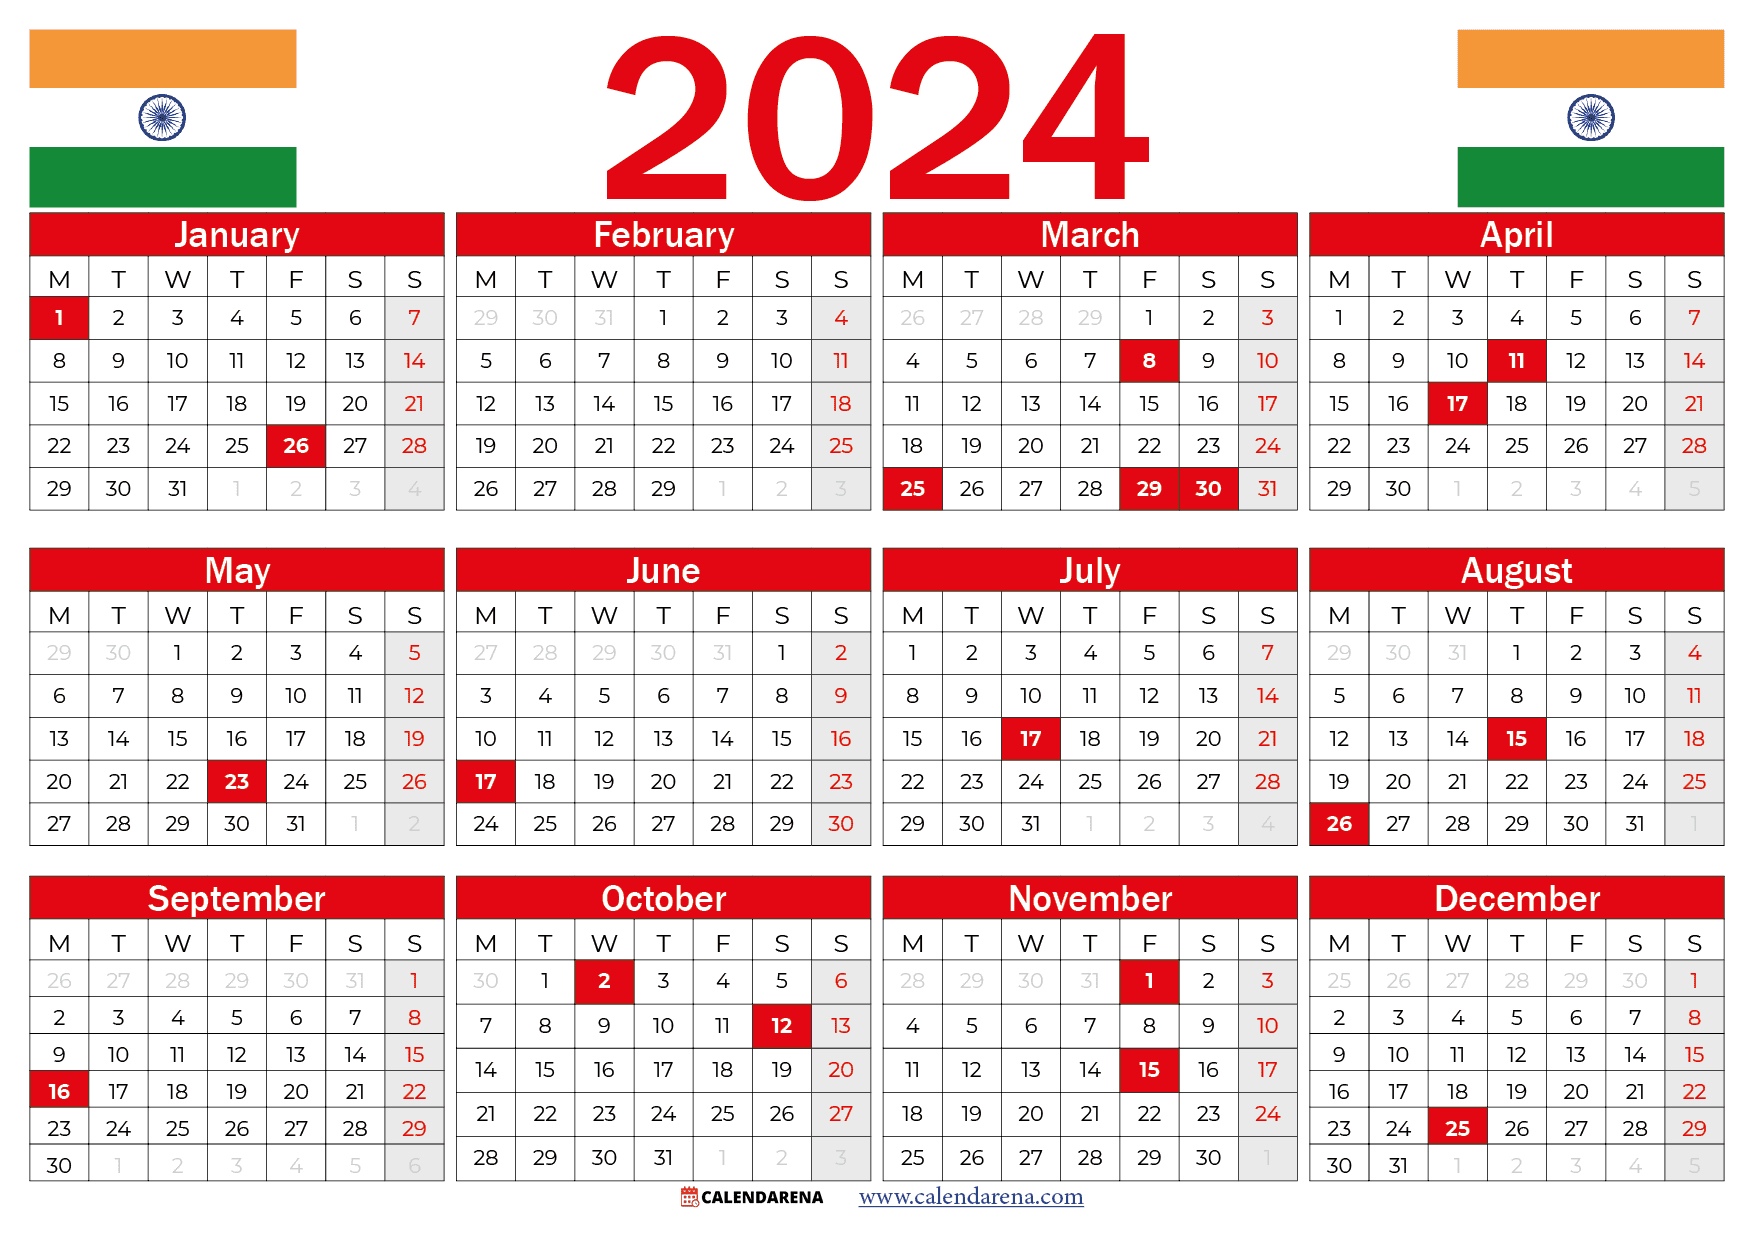 Calendar 2023 India With Holidays And Festivals | Printable Calendar 2024 India With Holidays And Festivals